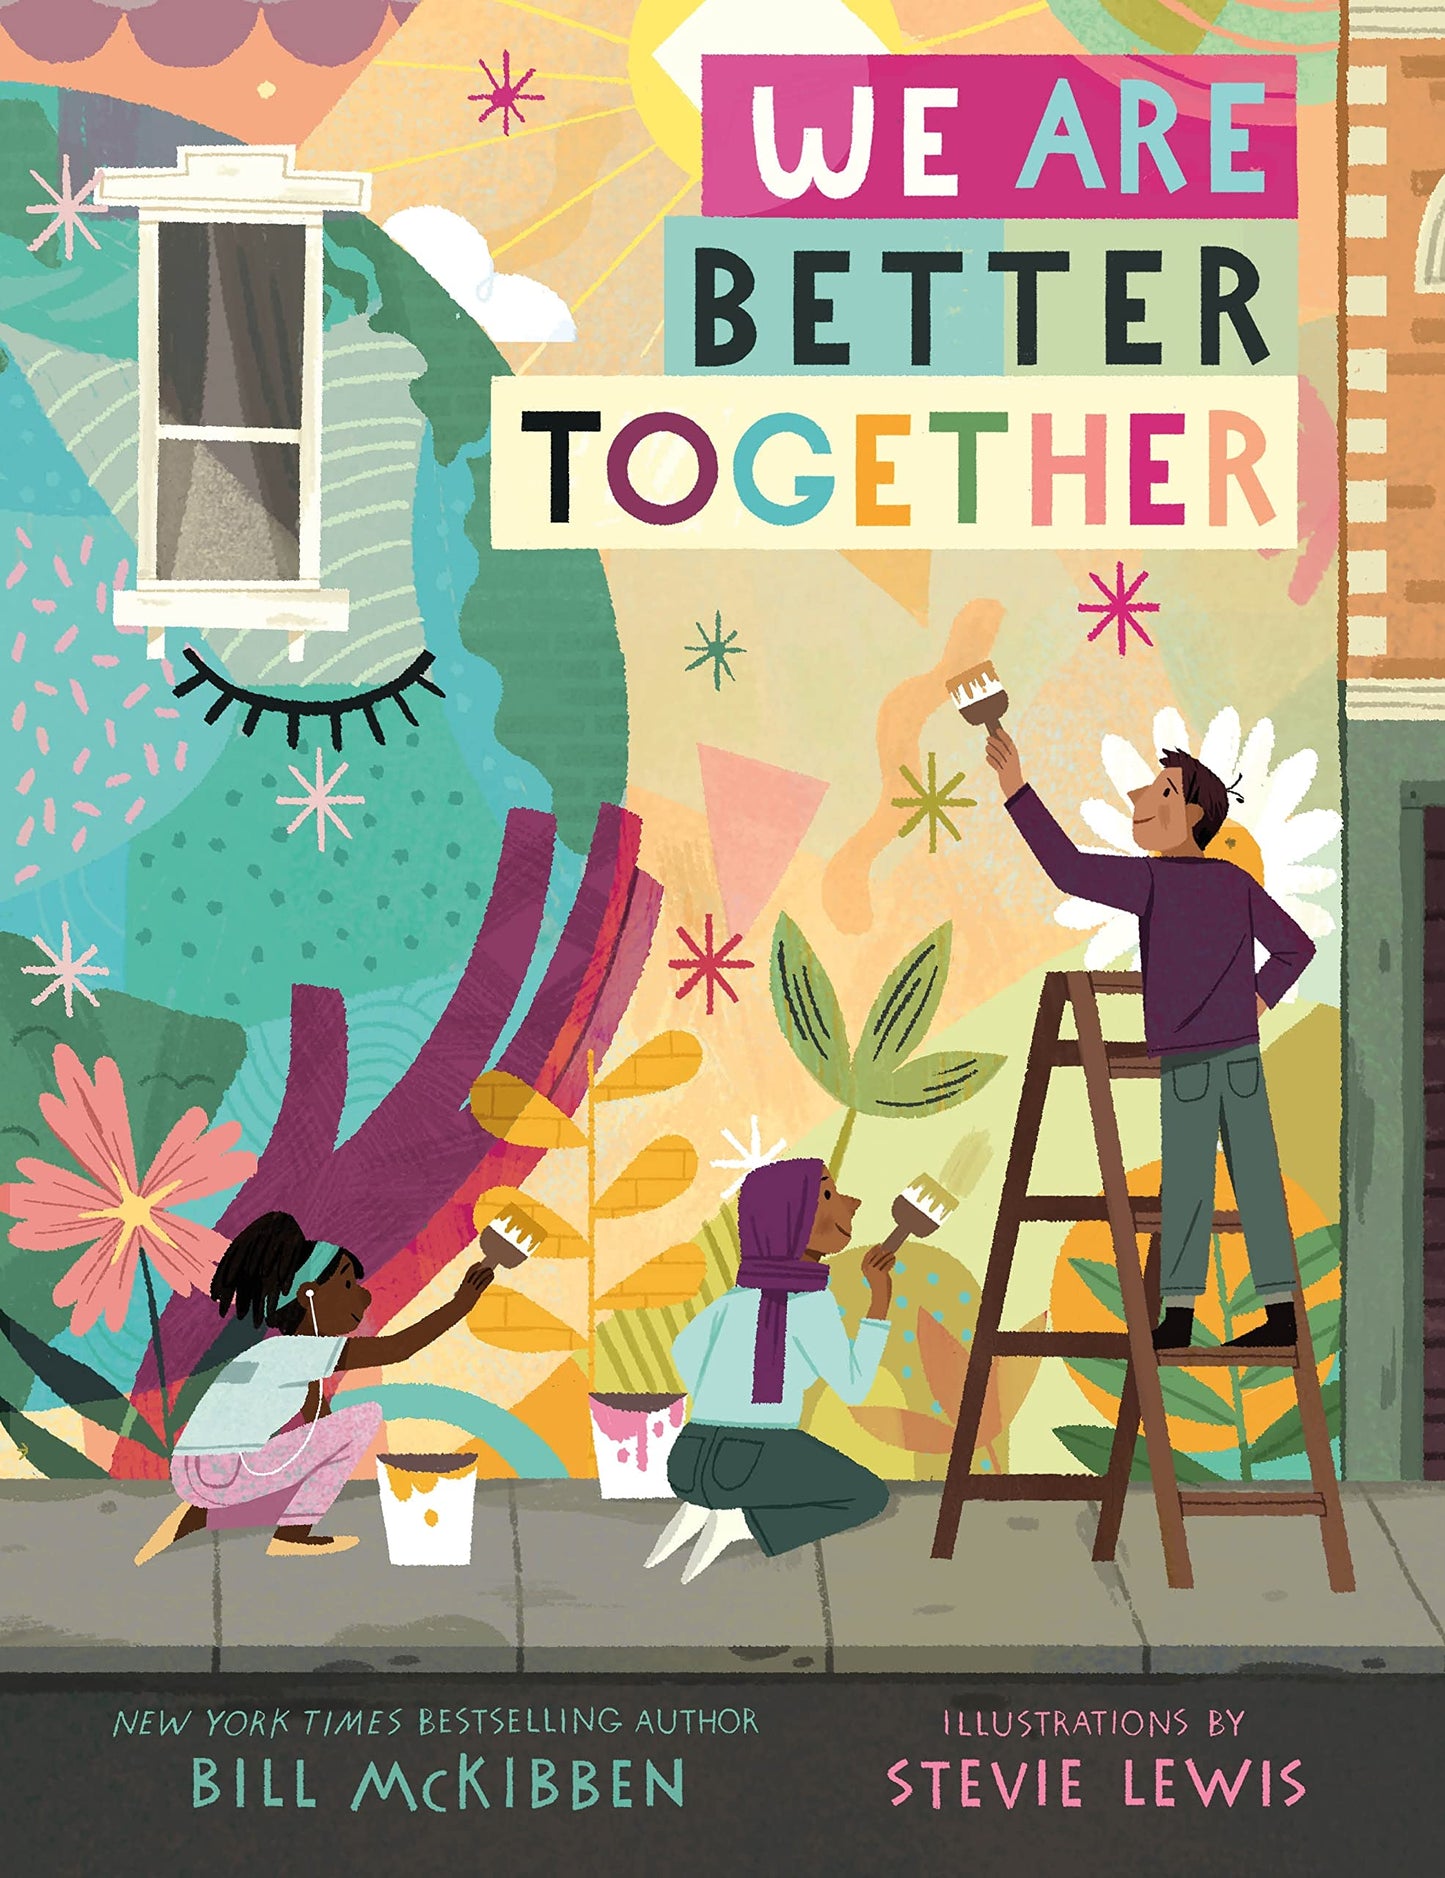 We Are Better Together by Bill McKibben and Stevie Lewis